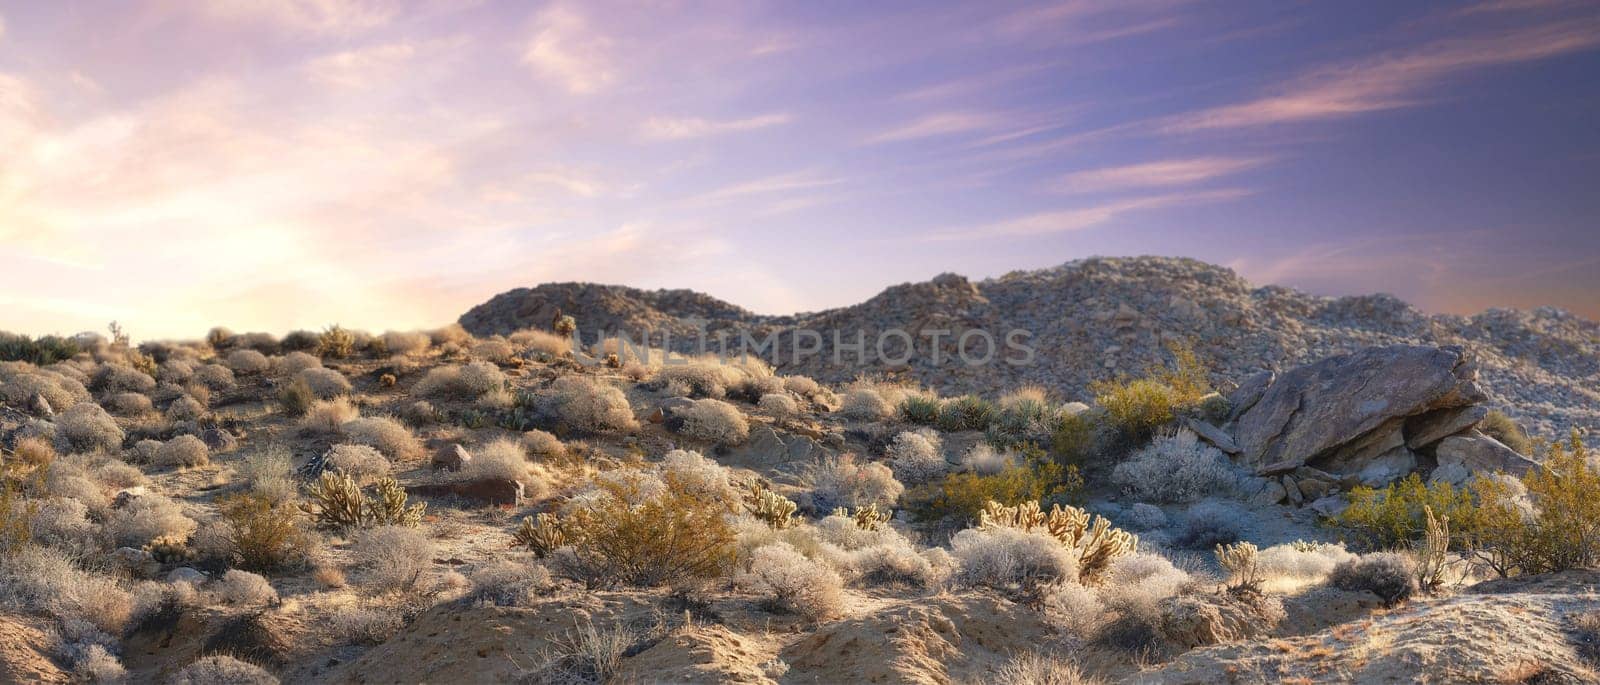 California, desert and land with panorama, environment and blue sky for travel or tourism. Nature, mountain and landscape for cactus, scenery and usa sunshine with summer weather and outdoor harmony.